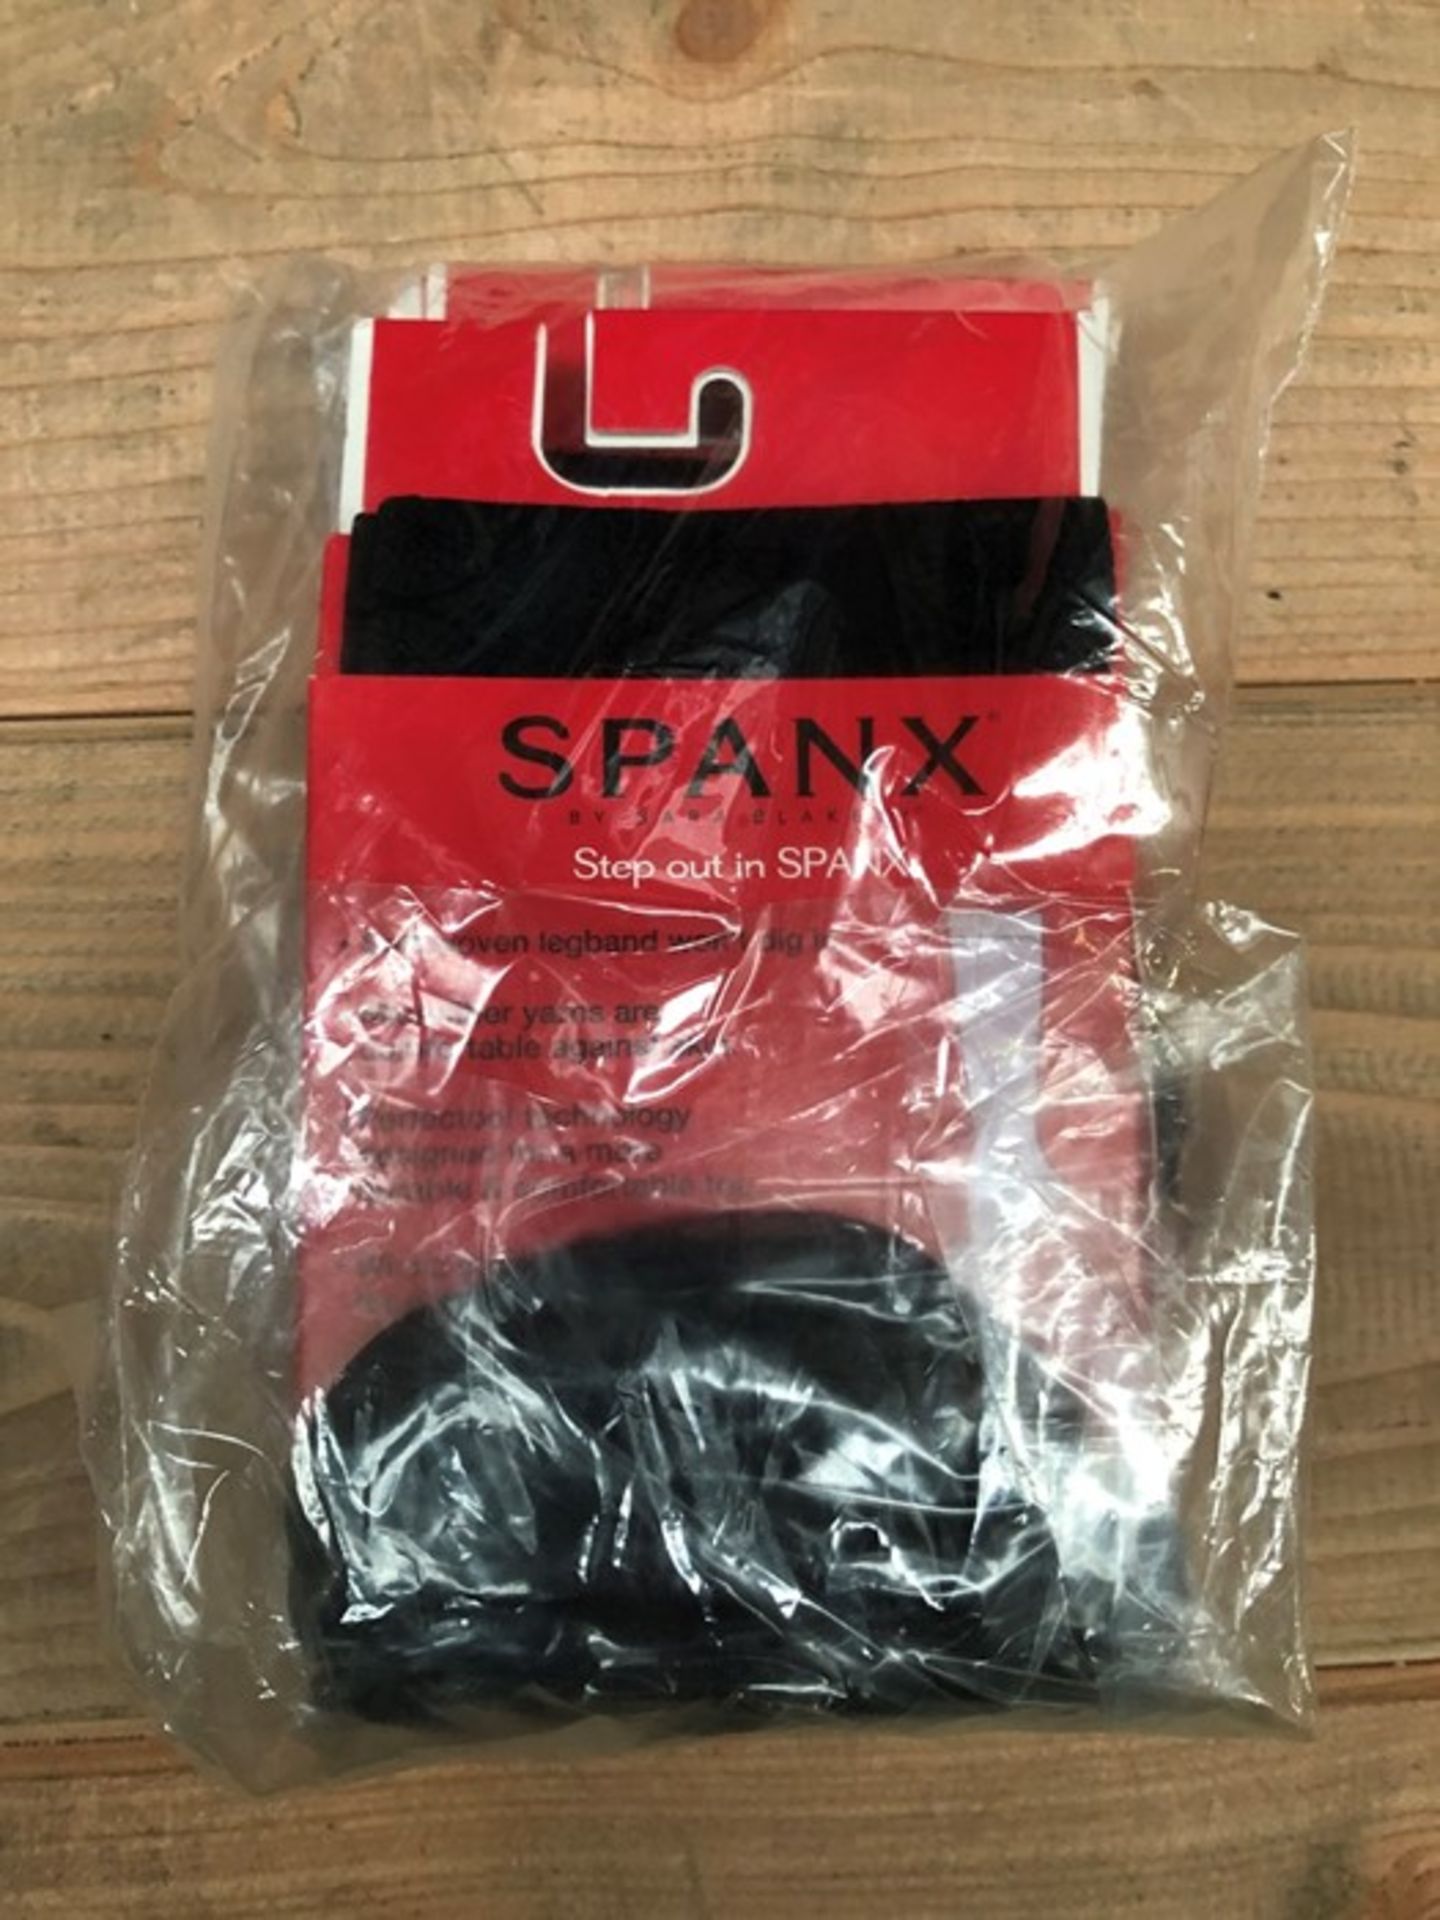 1 LOT TO CONTAIN 25 SPANX SOCKS IN BCSTP / SIZE ONE SIZE / STYLE 105 / RRP £375.00 (PUBLIC VIEWING